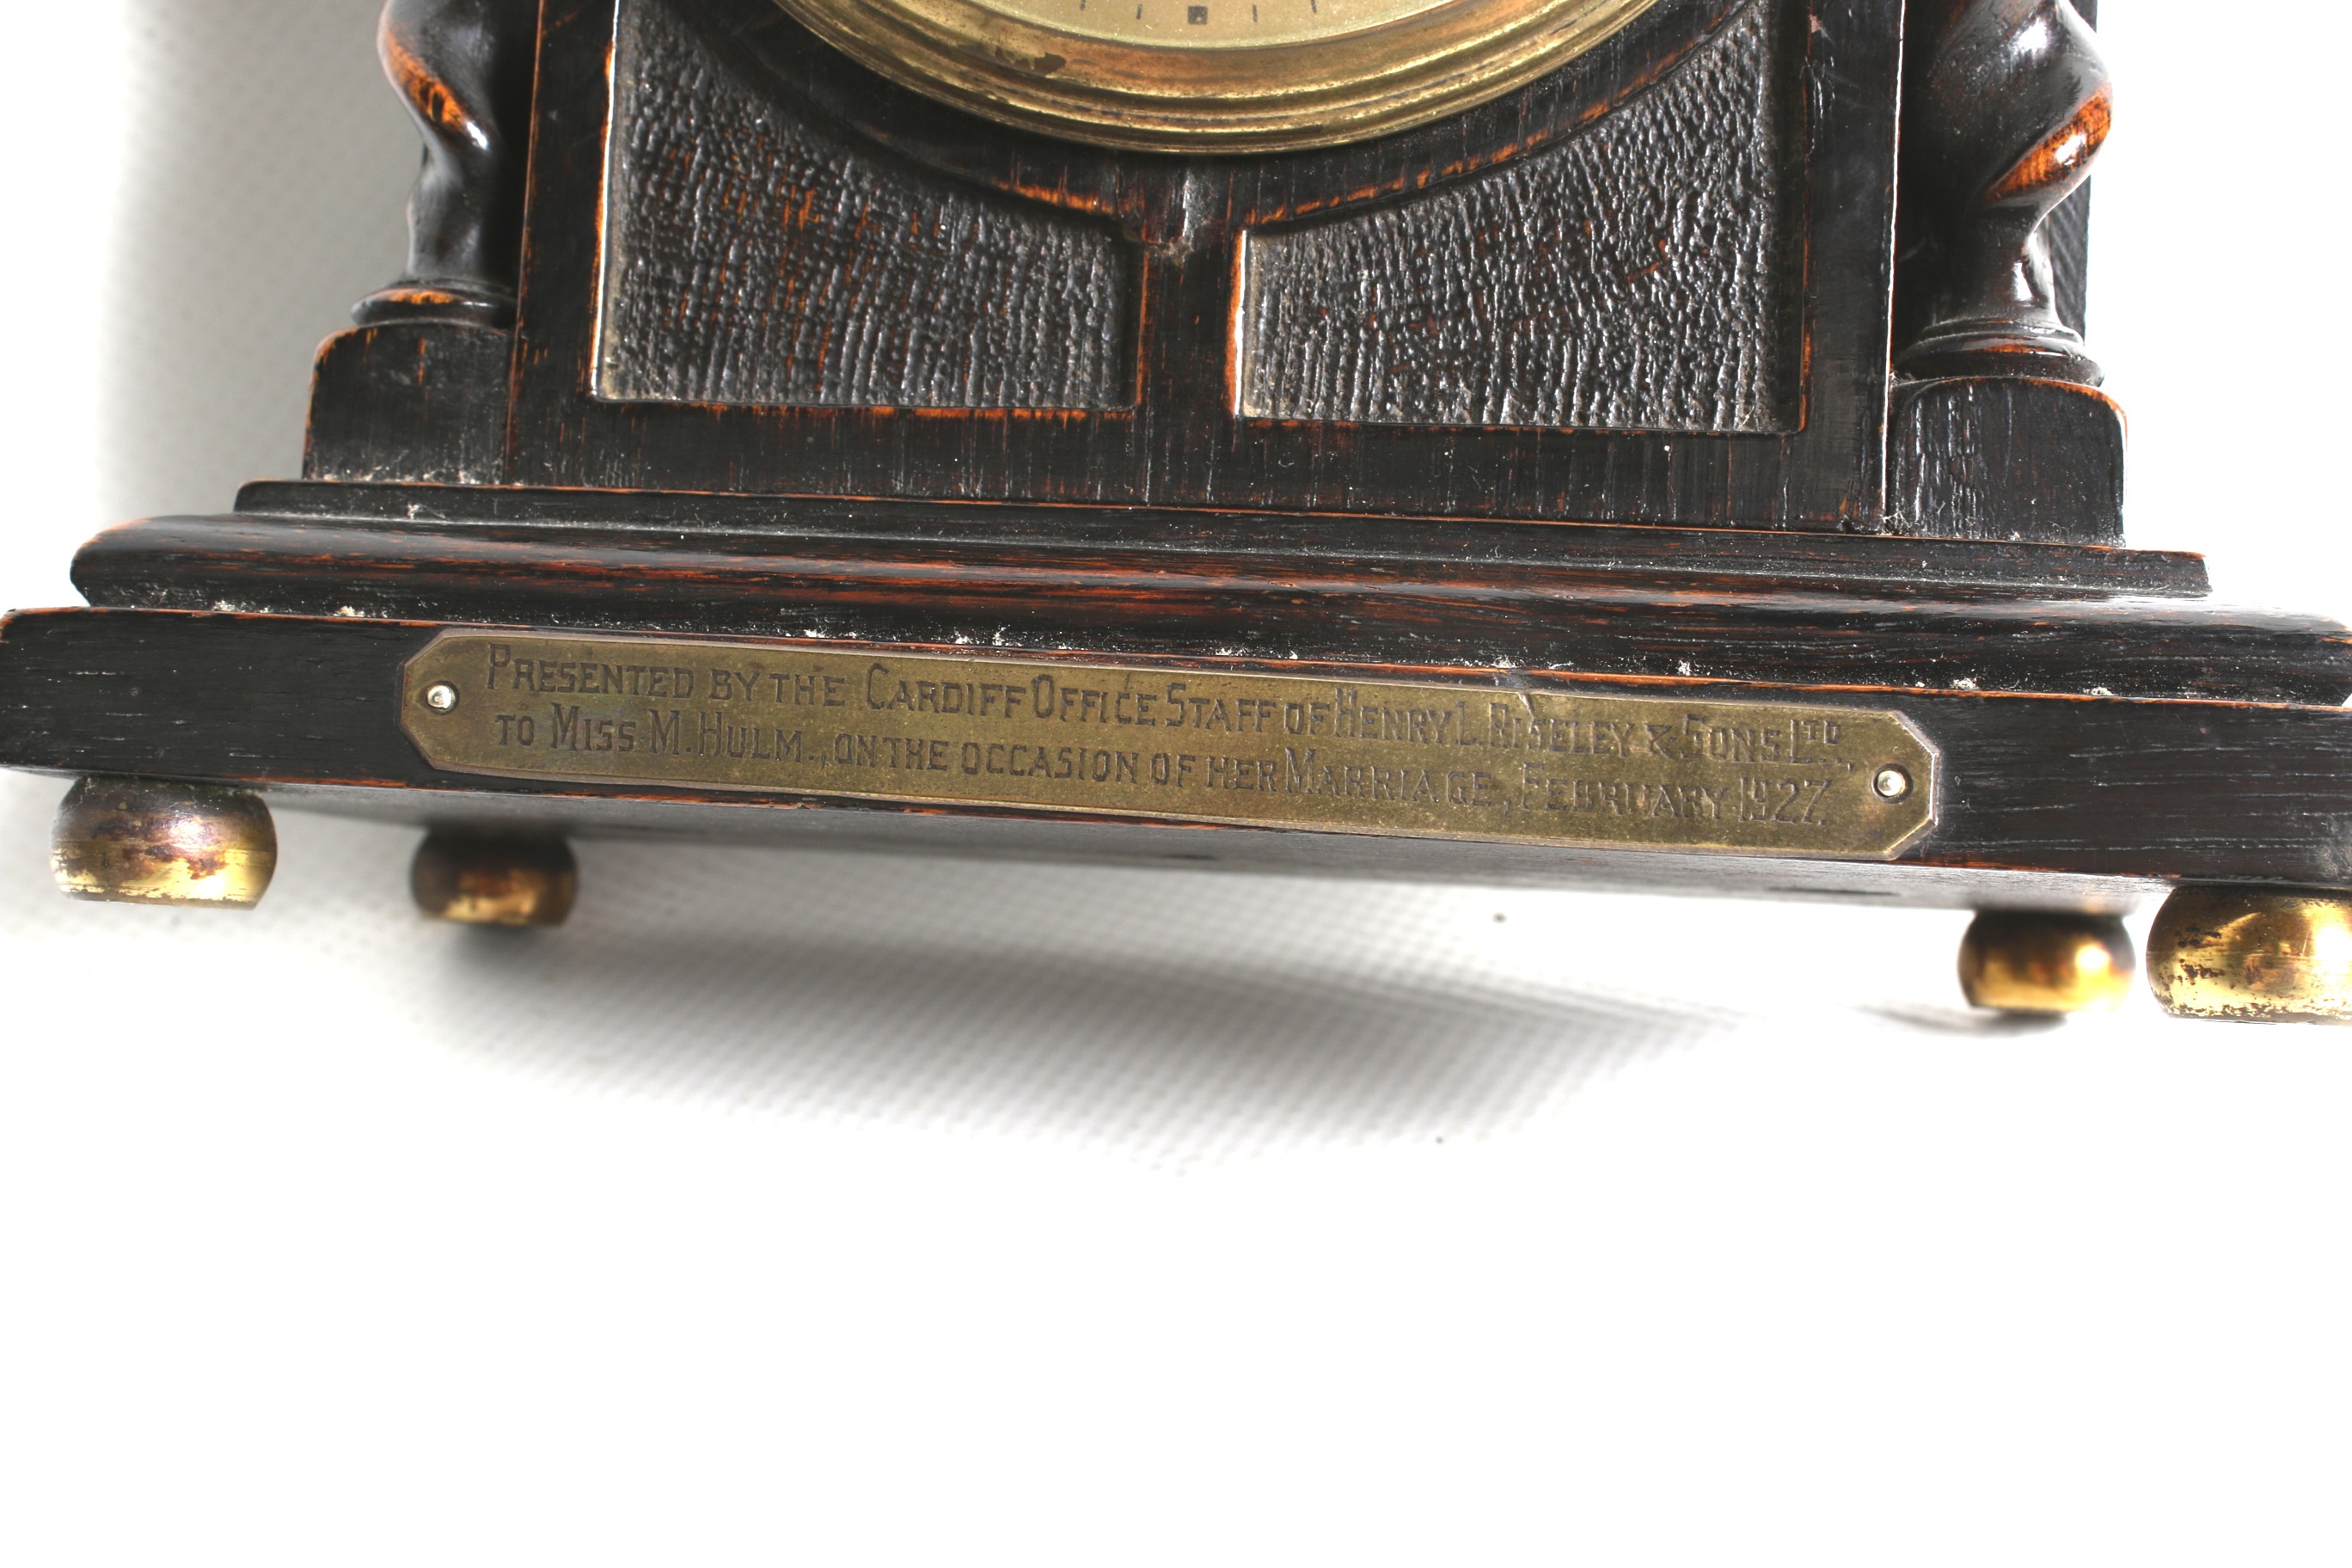 A Smith's carved wood cased mantel clock. - Image 2 of 3